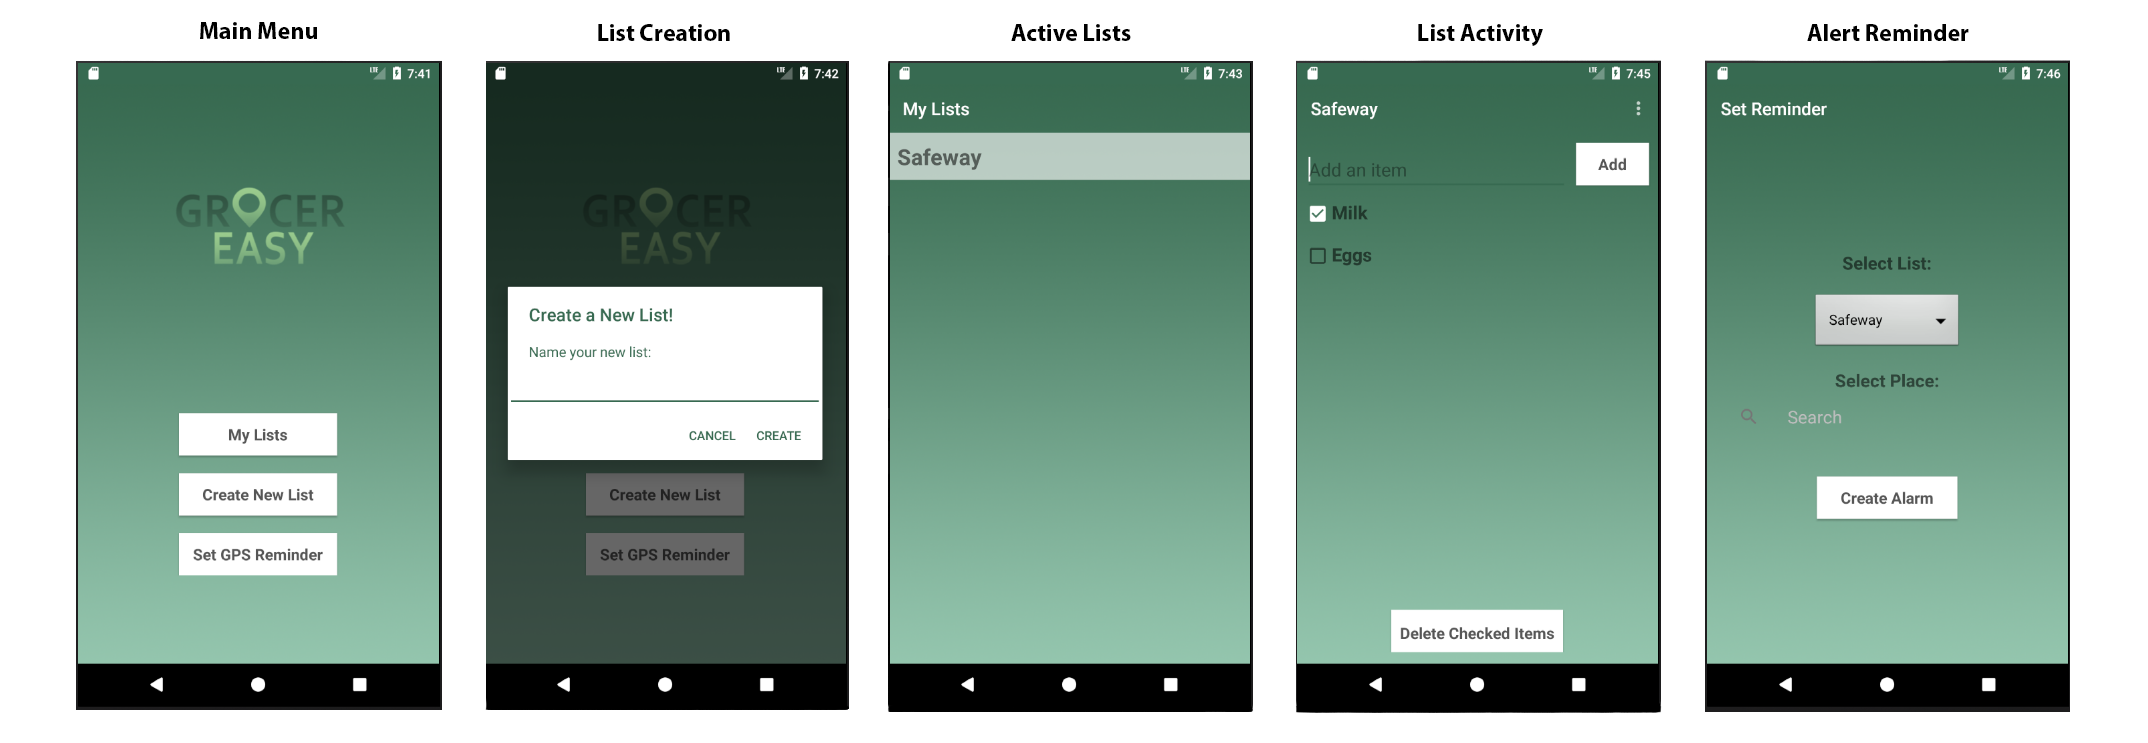 Image showing the final UI iterations of the app UI